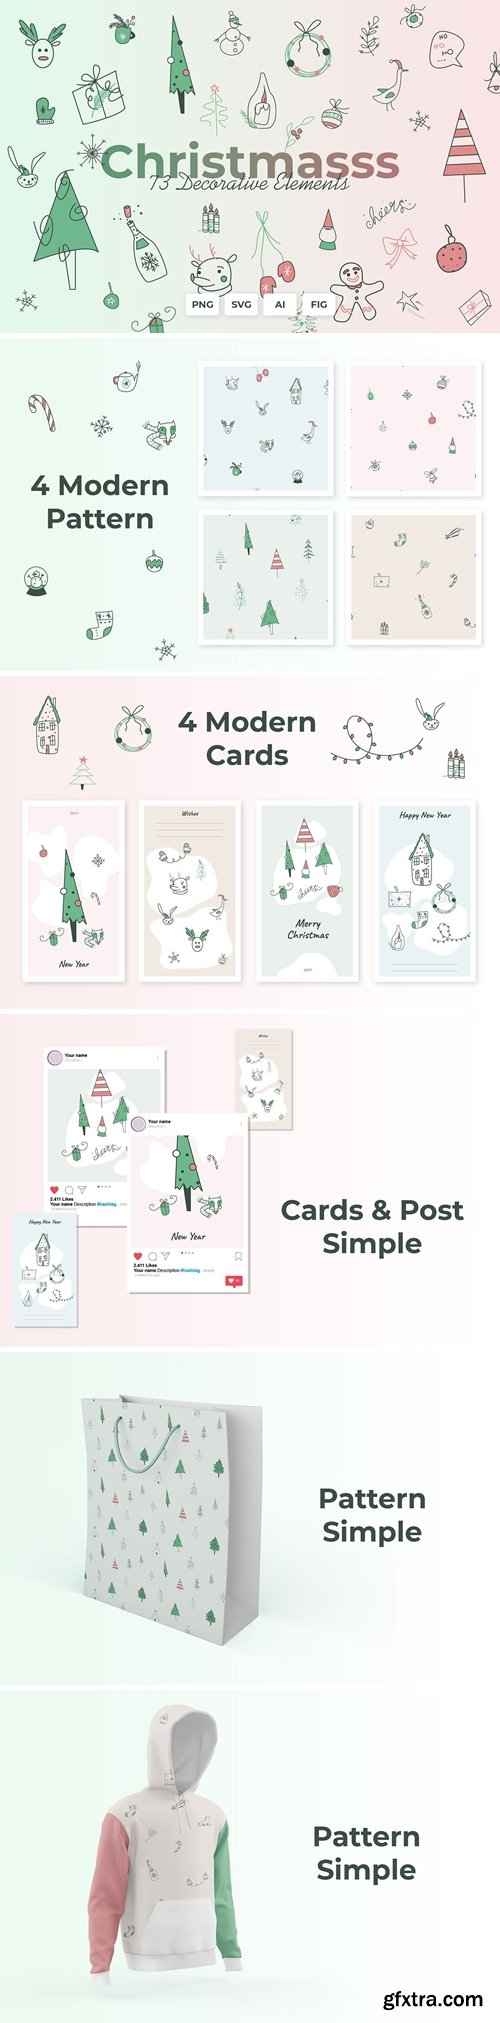 Christmasss - Decor elements, Cards